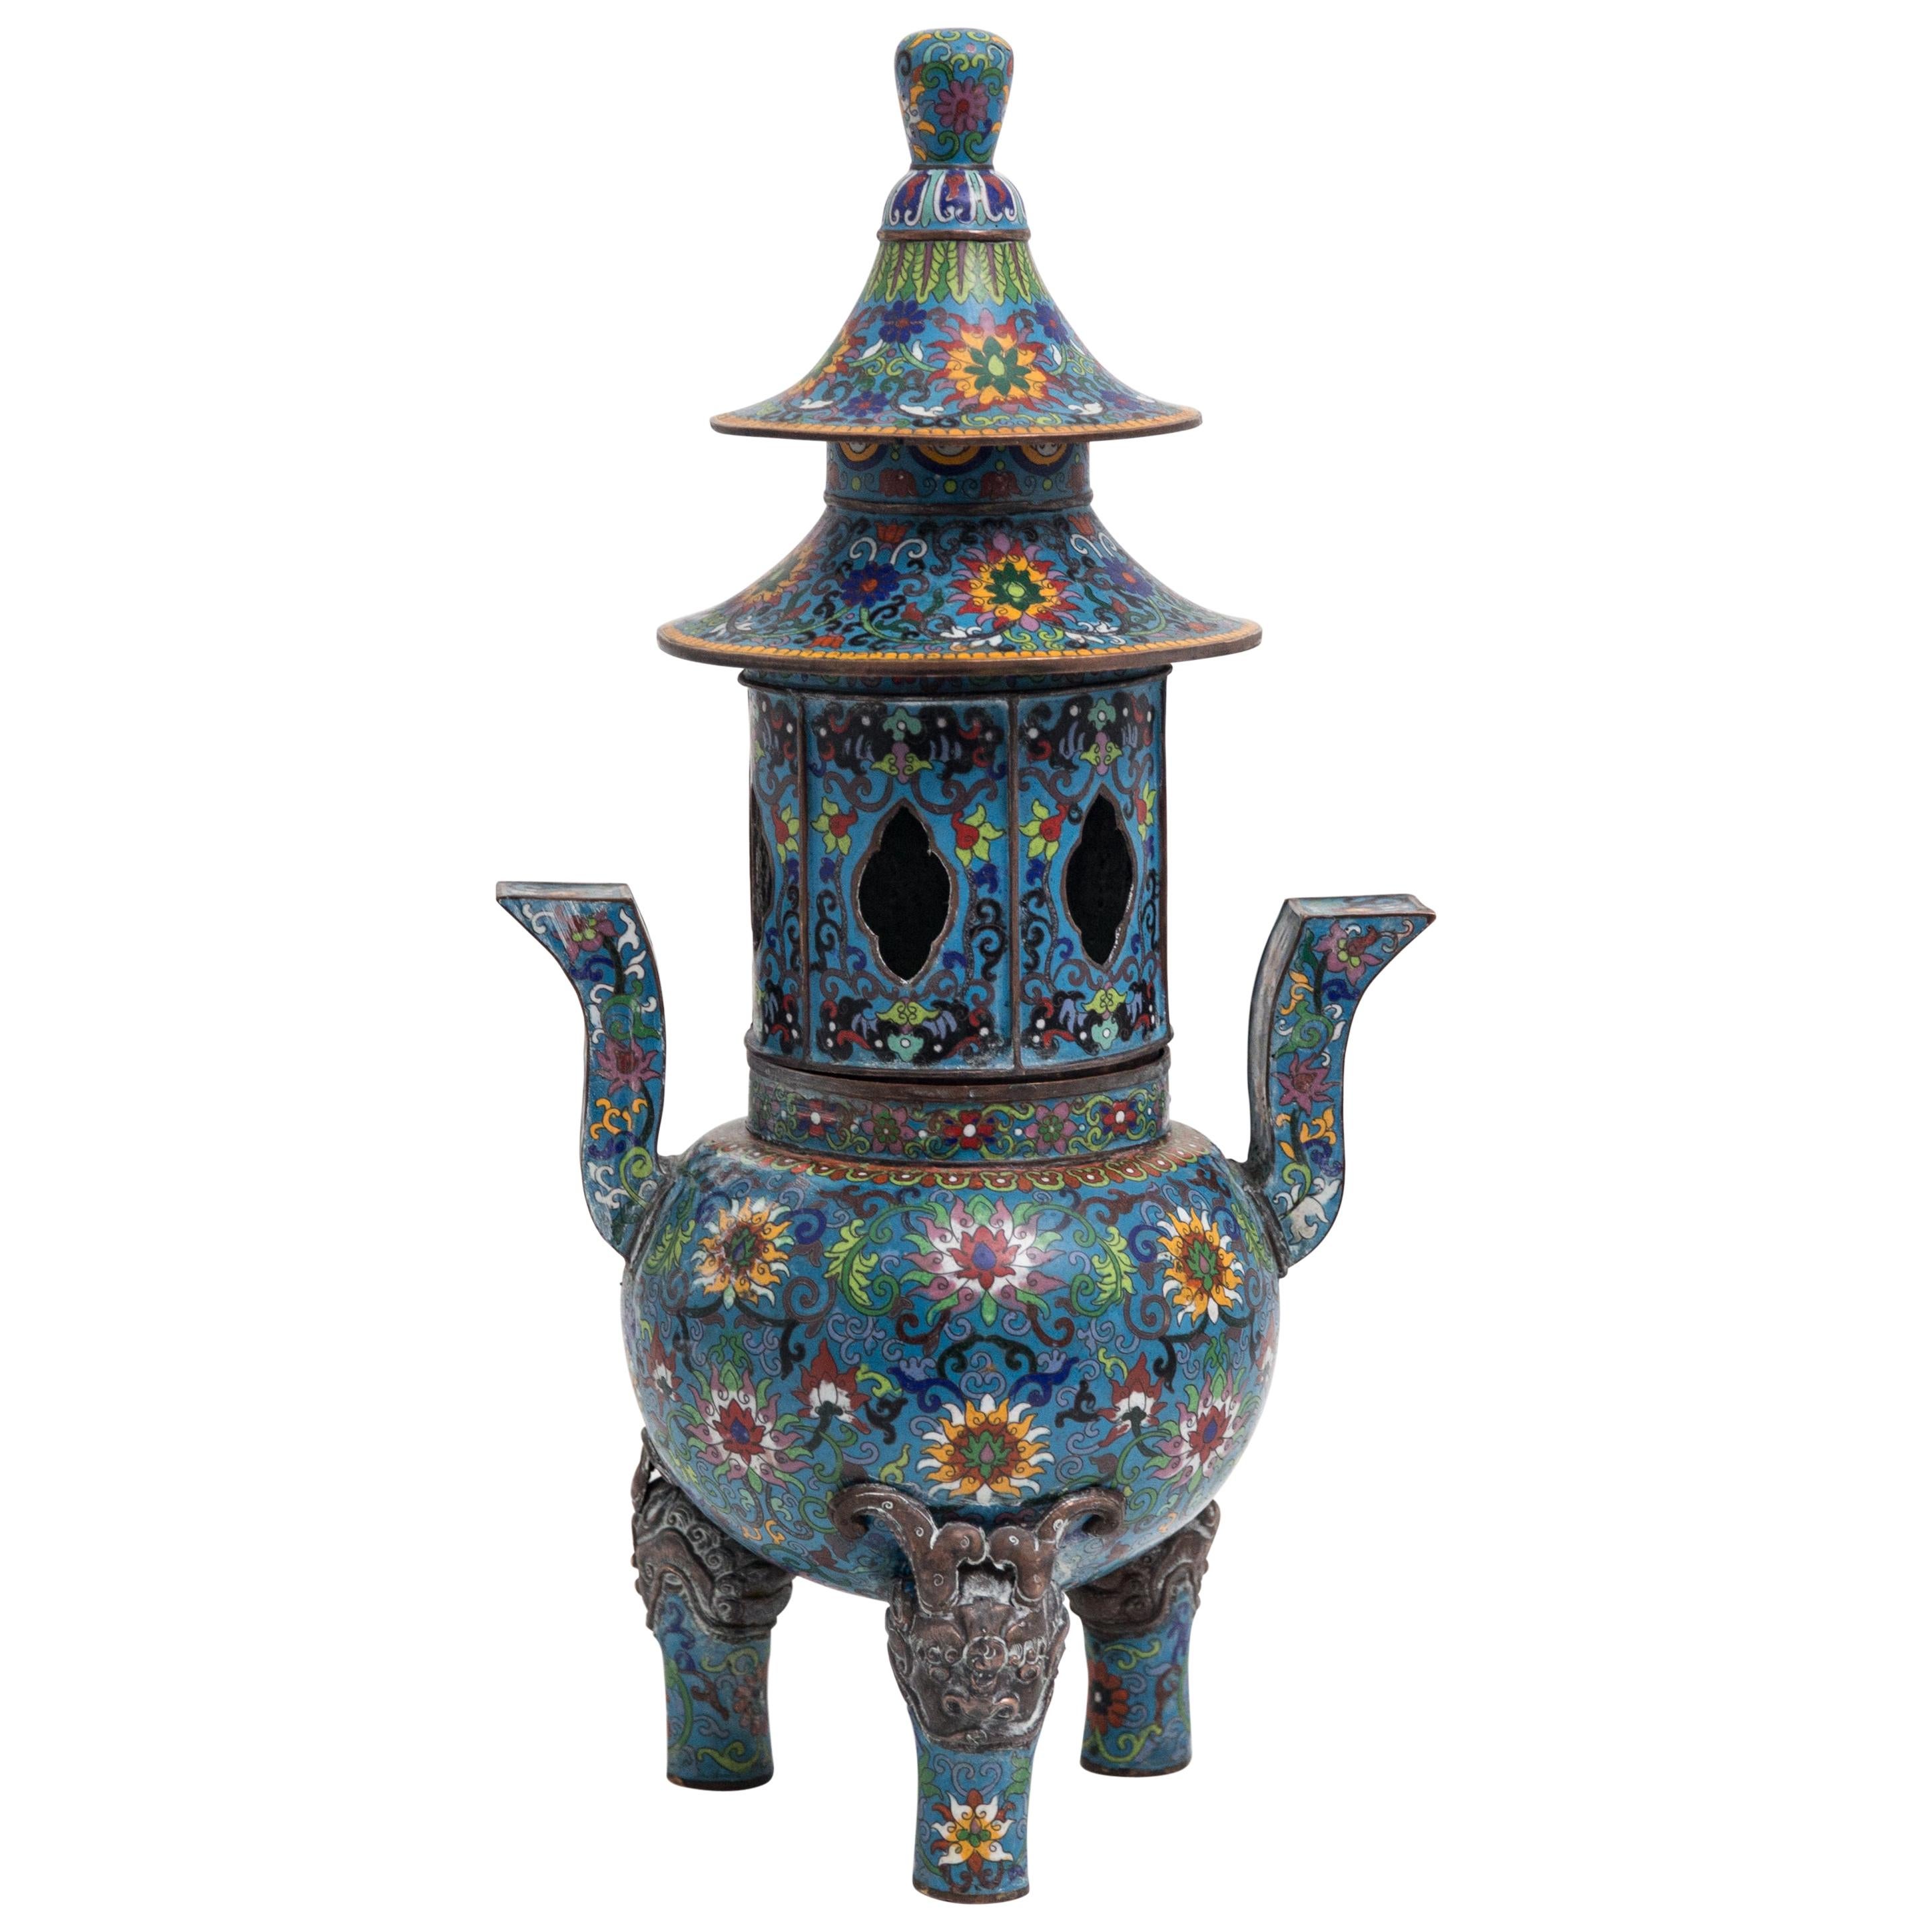 Details about   Chinese Cloisonne handmade lucky Dragon pagoda incense burner Qianlong Year 